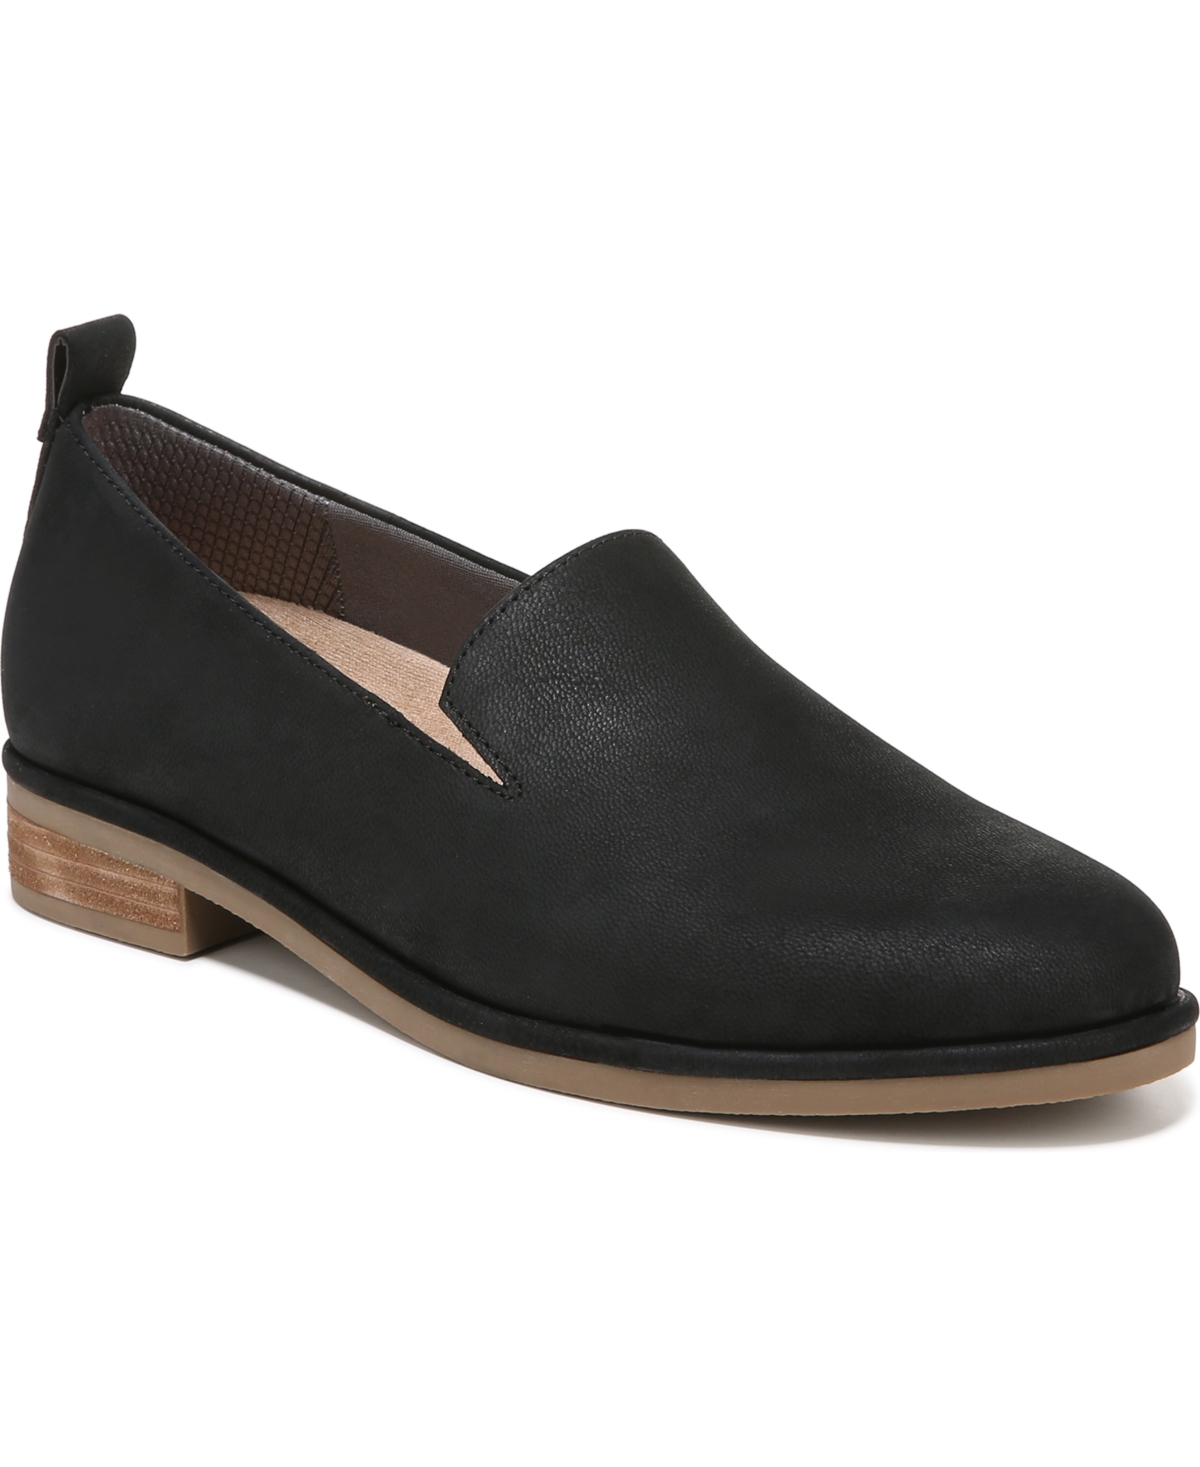 Women's Avenue Lux Loafers - Black Leather